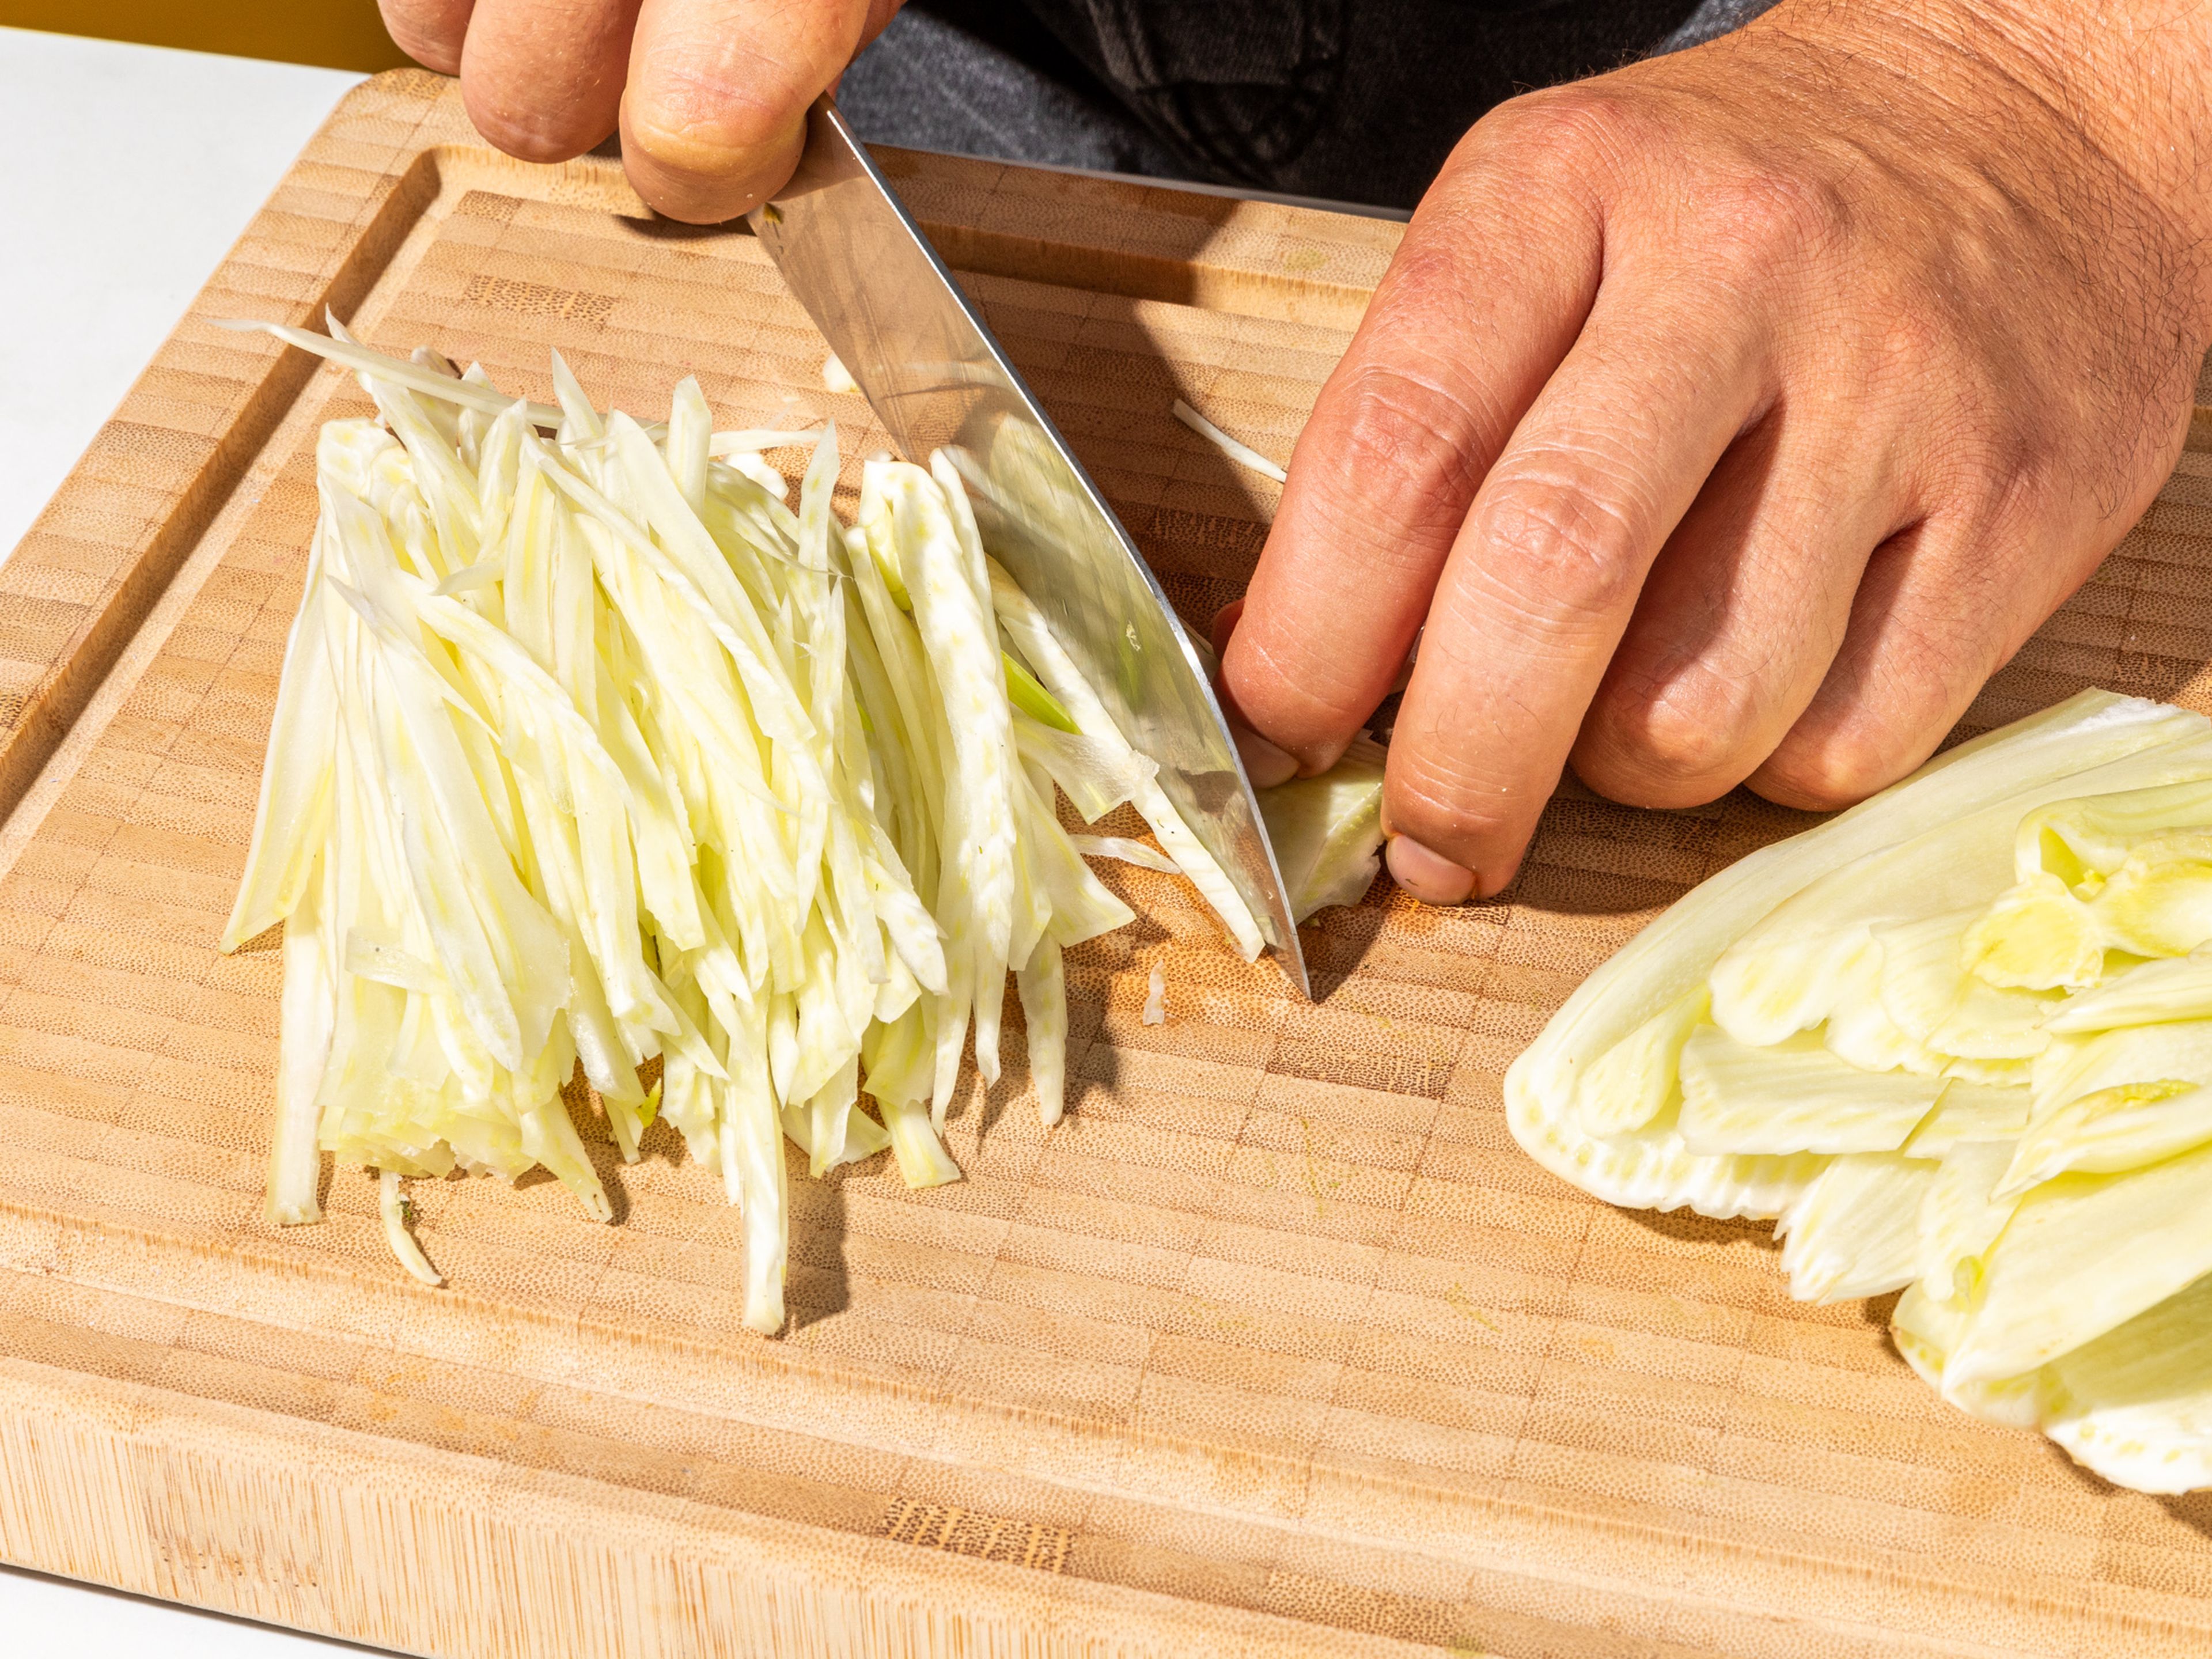 Use a vegetable peeler to shave the cucumber lengthwise into strips. Thinly slice the fennel. Add both to a bowl, season with a little salt and pepper, add red wine vinegar, and mix. Set aside. Finely chop the dill.